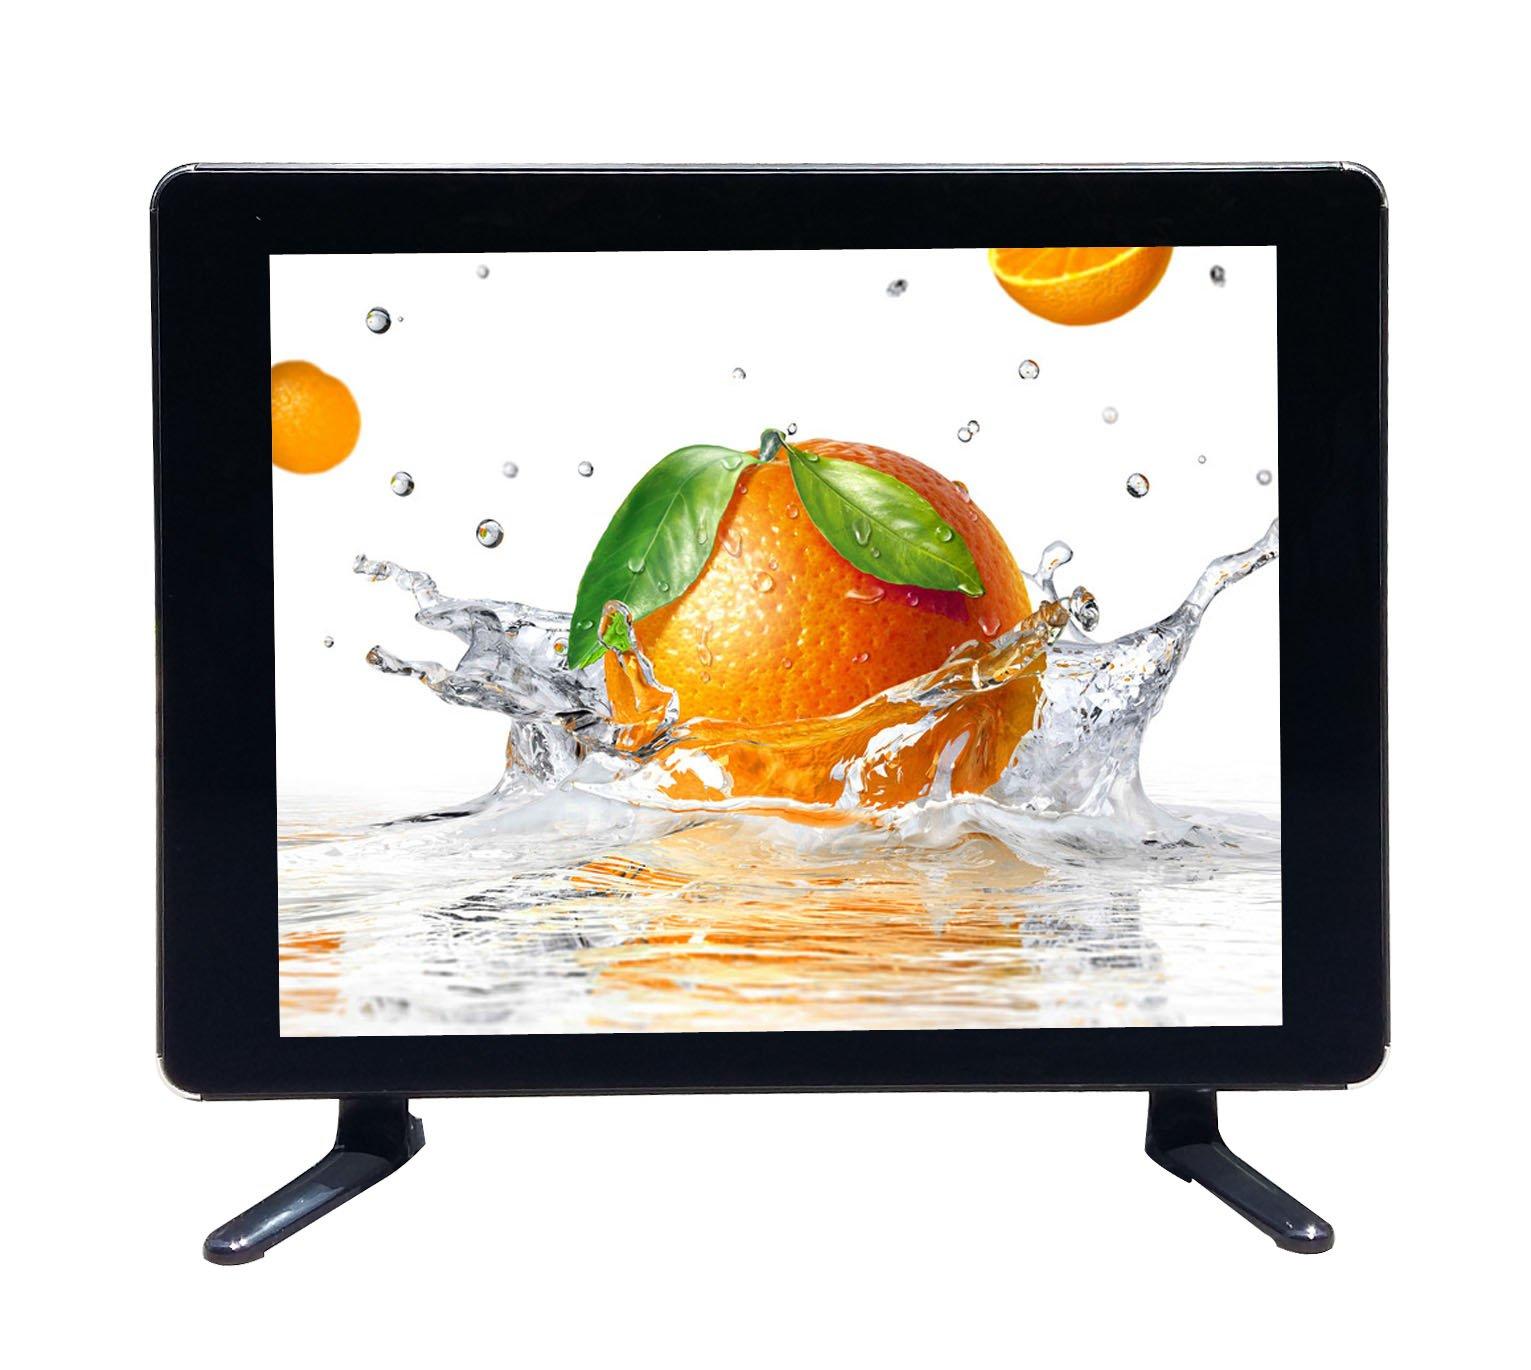 on-sale 17 inch lcd tv price fashion design for lcd tv screen